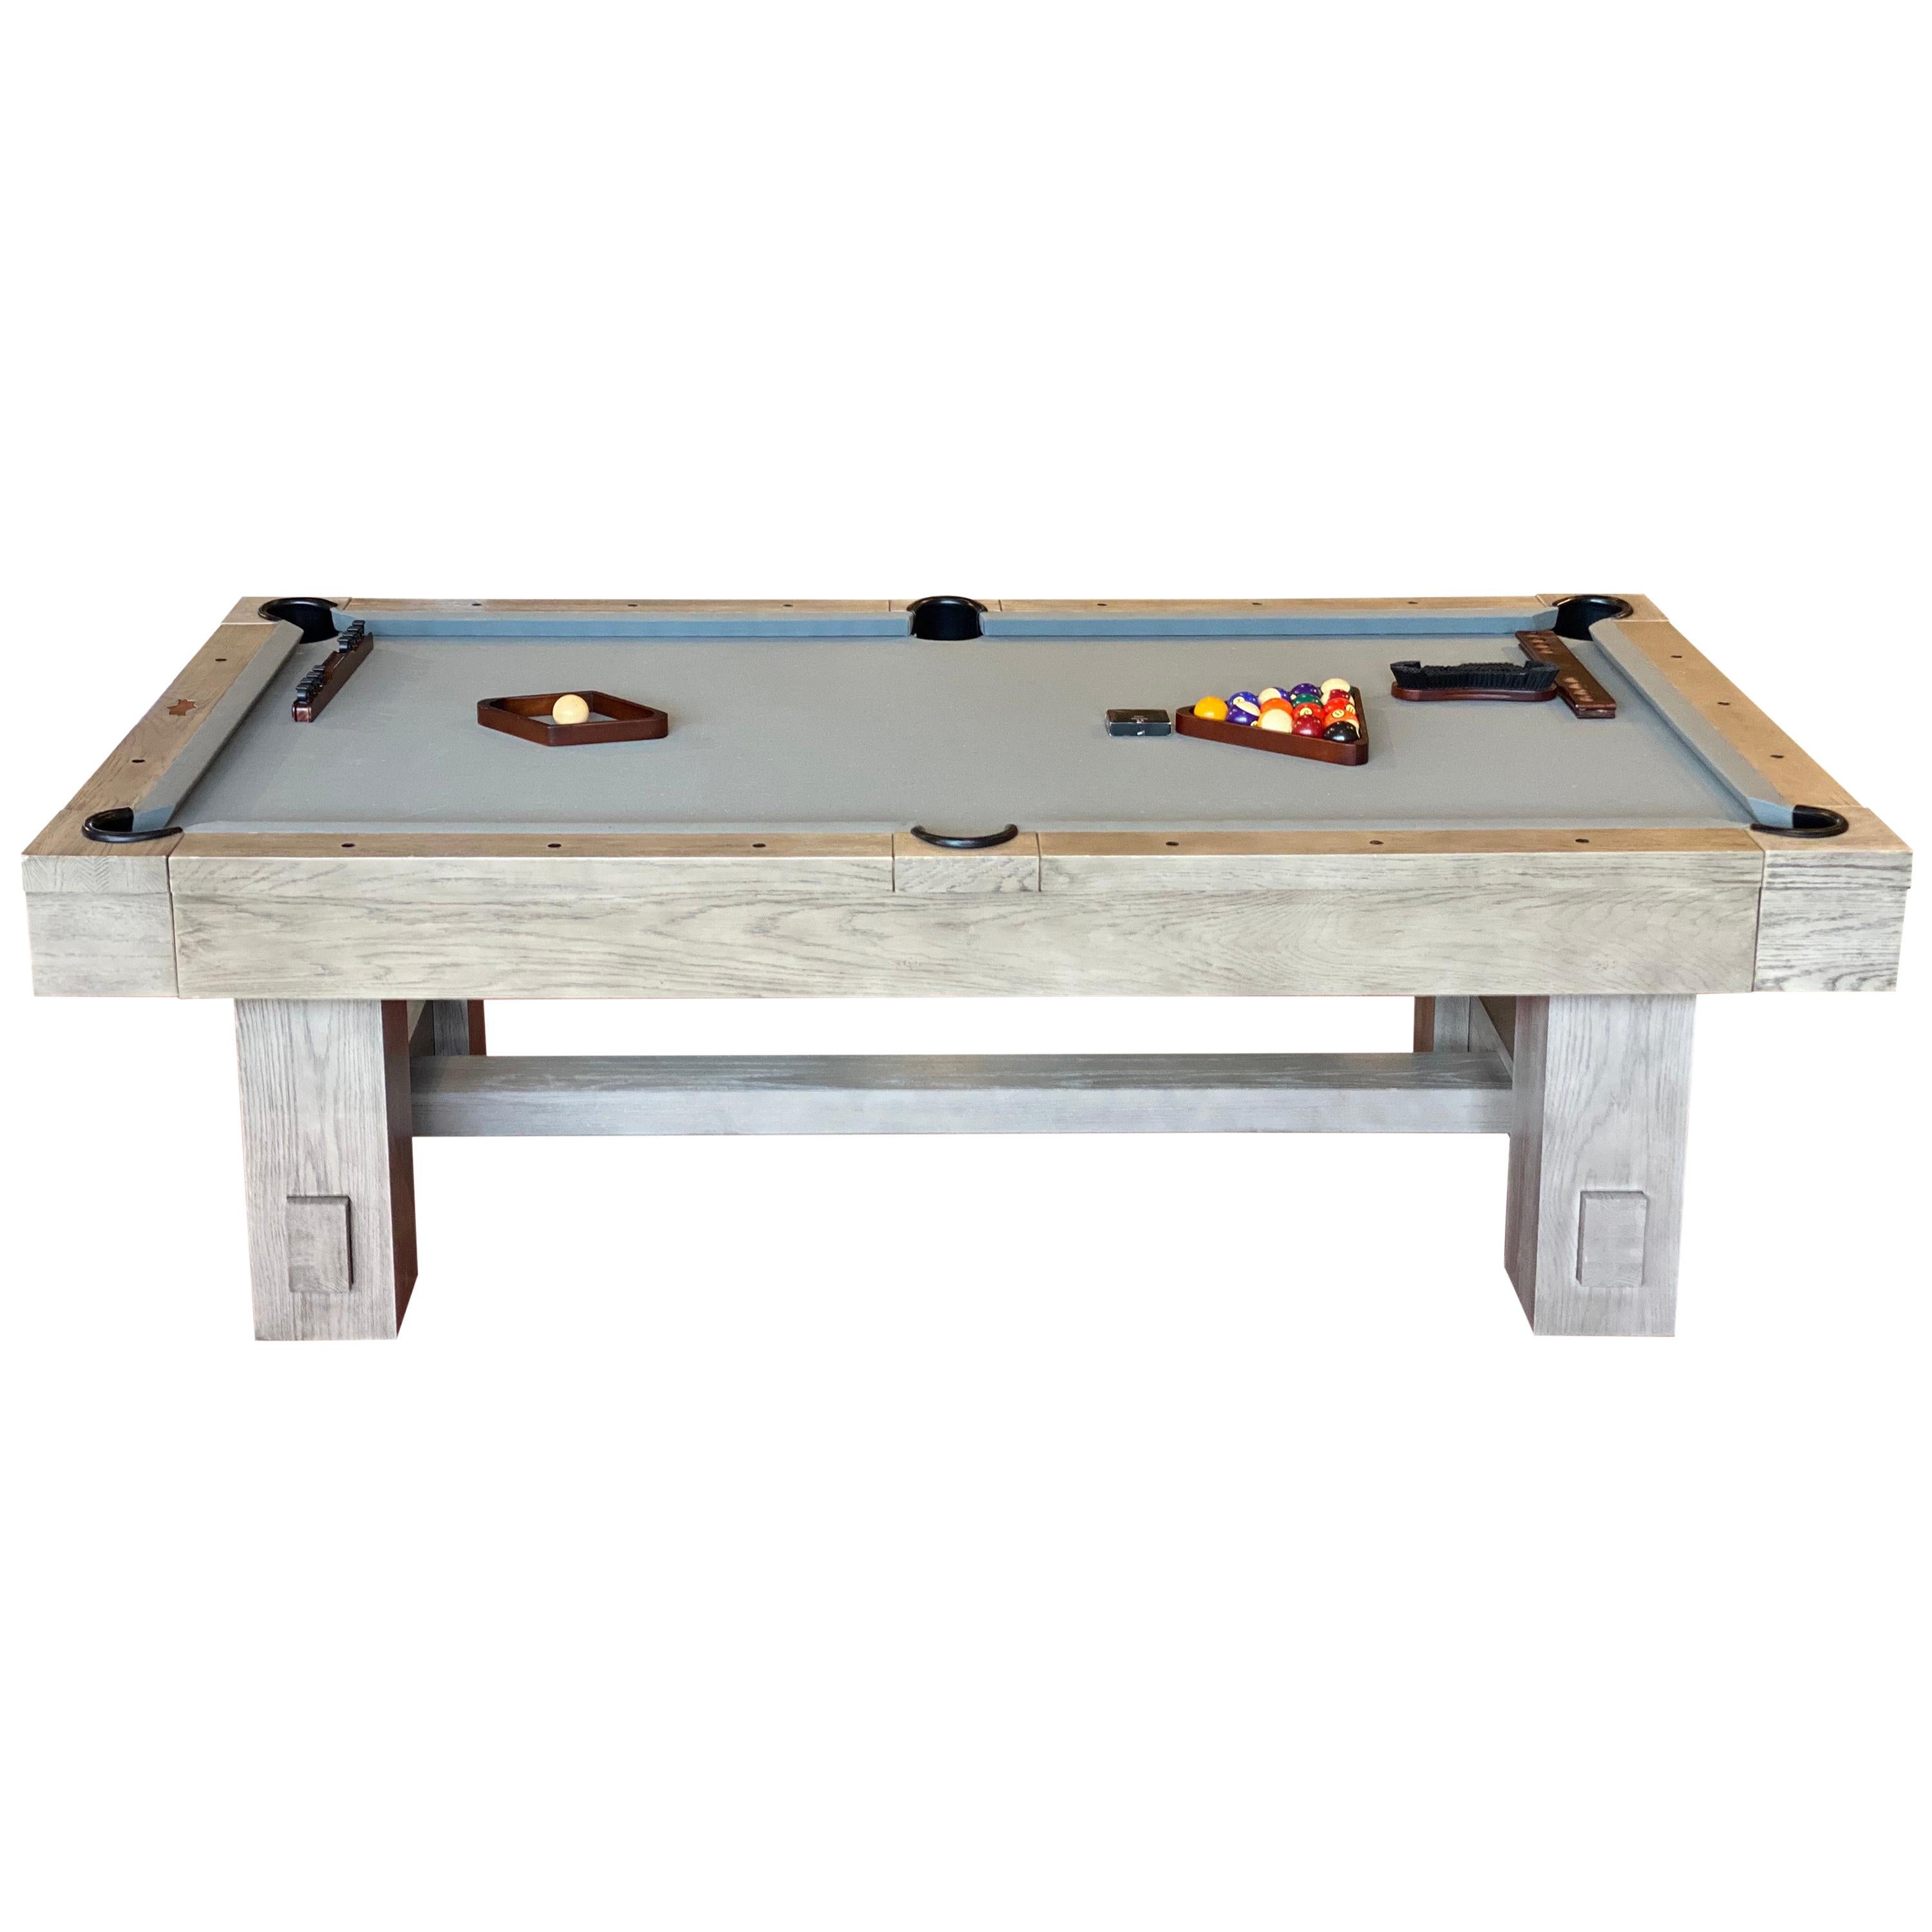 Post and Beam Design Weathered Finish Pool Table